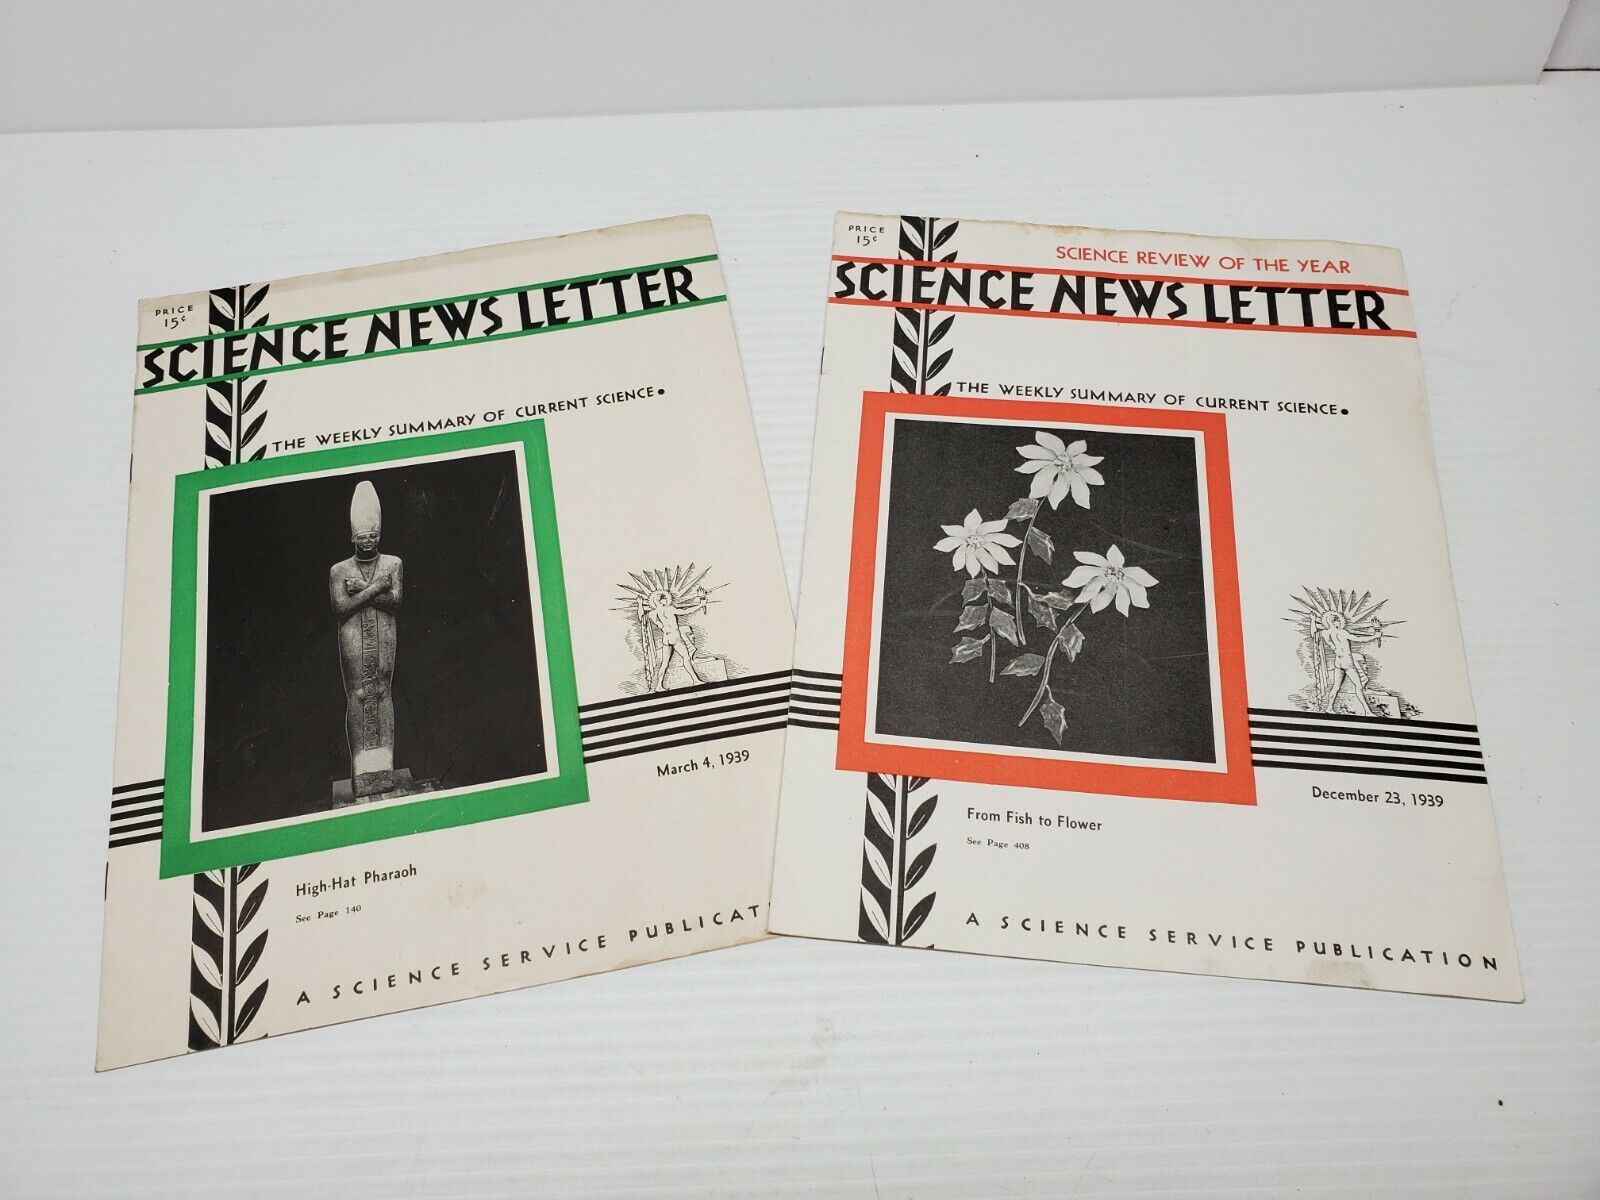 Science News Letter Magazines Lot of 2 VTG 1939 Weekly Summary Current Science